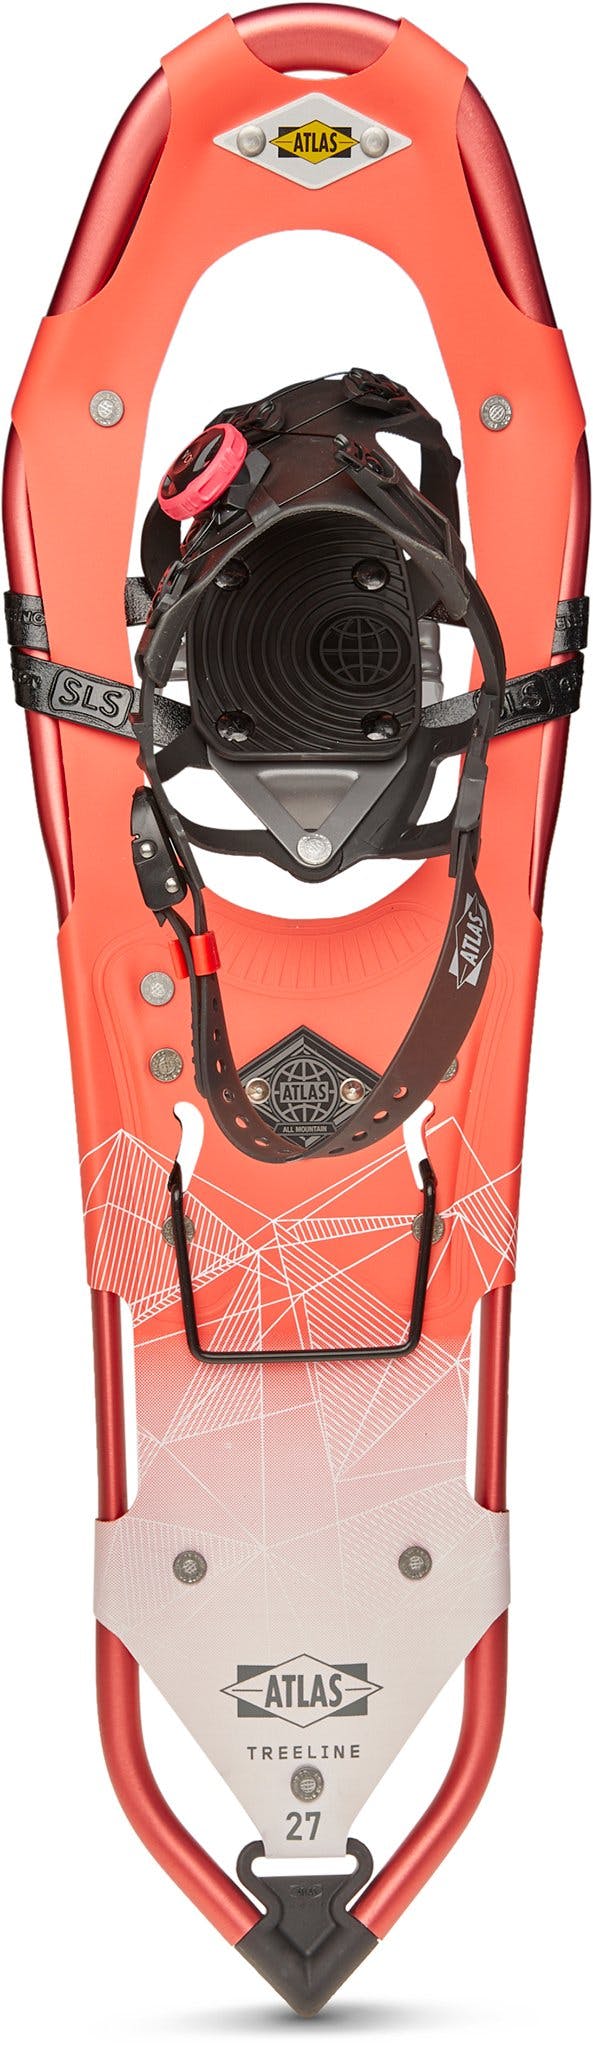 Product image for Treeline Elektra 27 inches Snowshoes - Women's